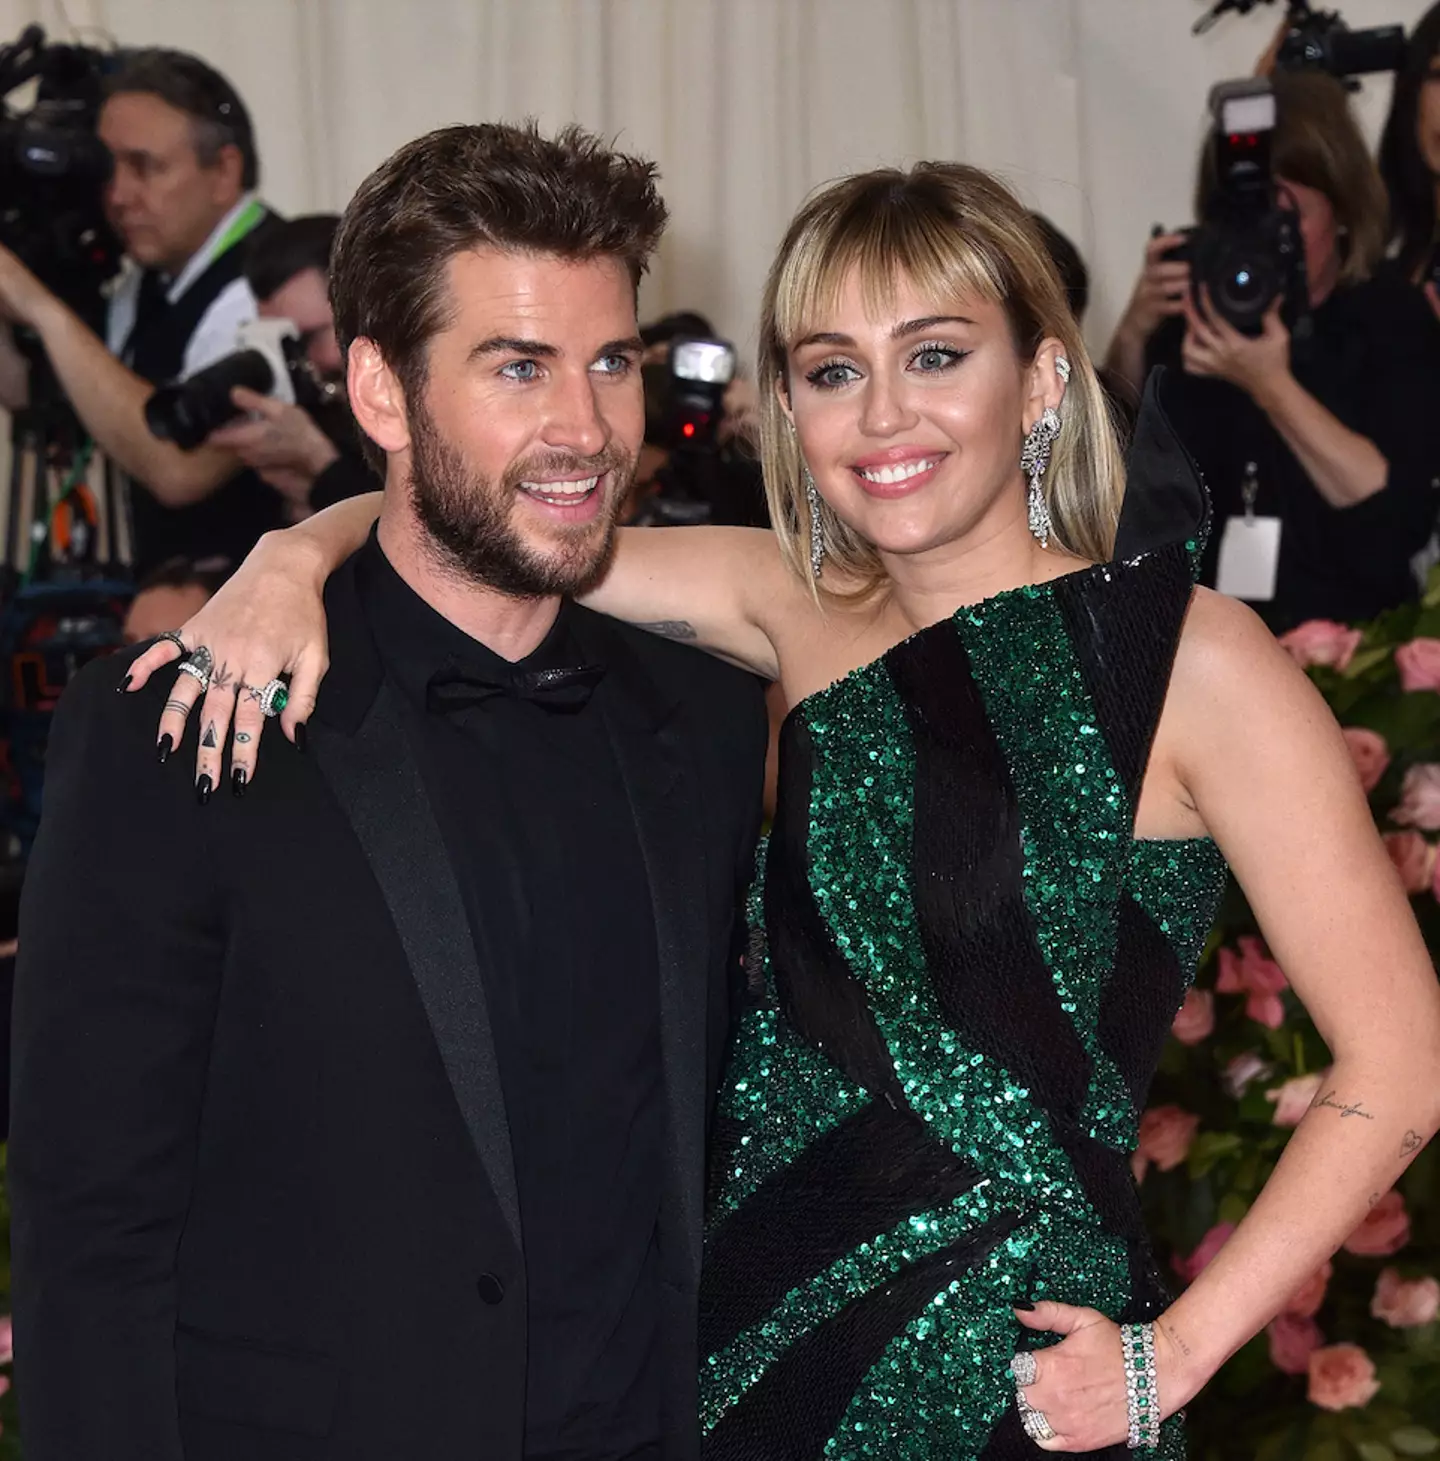 Liam Hemsworth and Miley Cyrus at the 2019 MET Gala after they got back together (